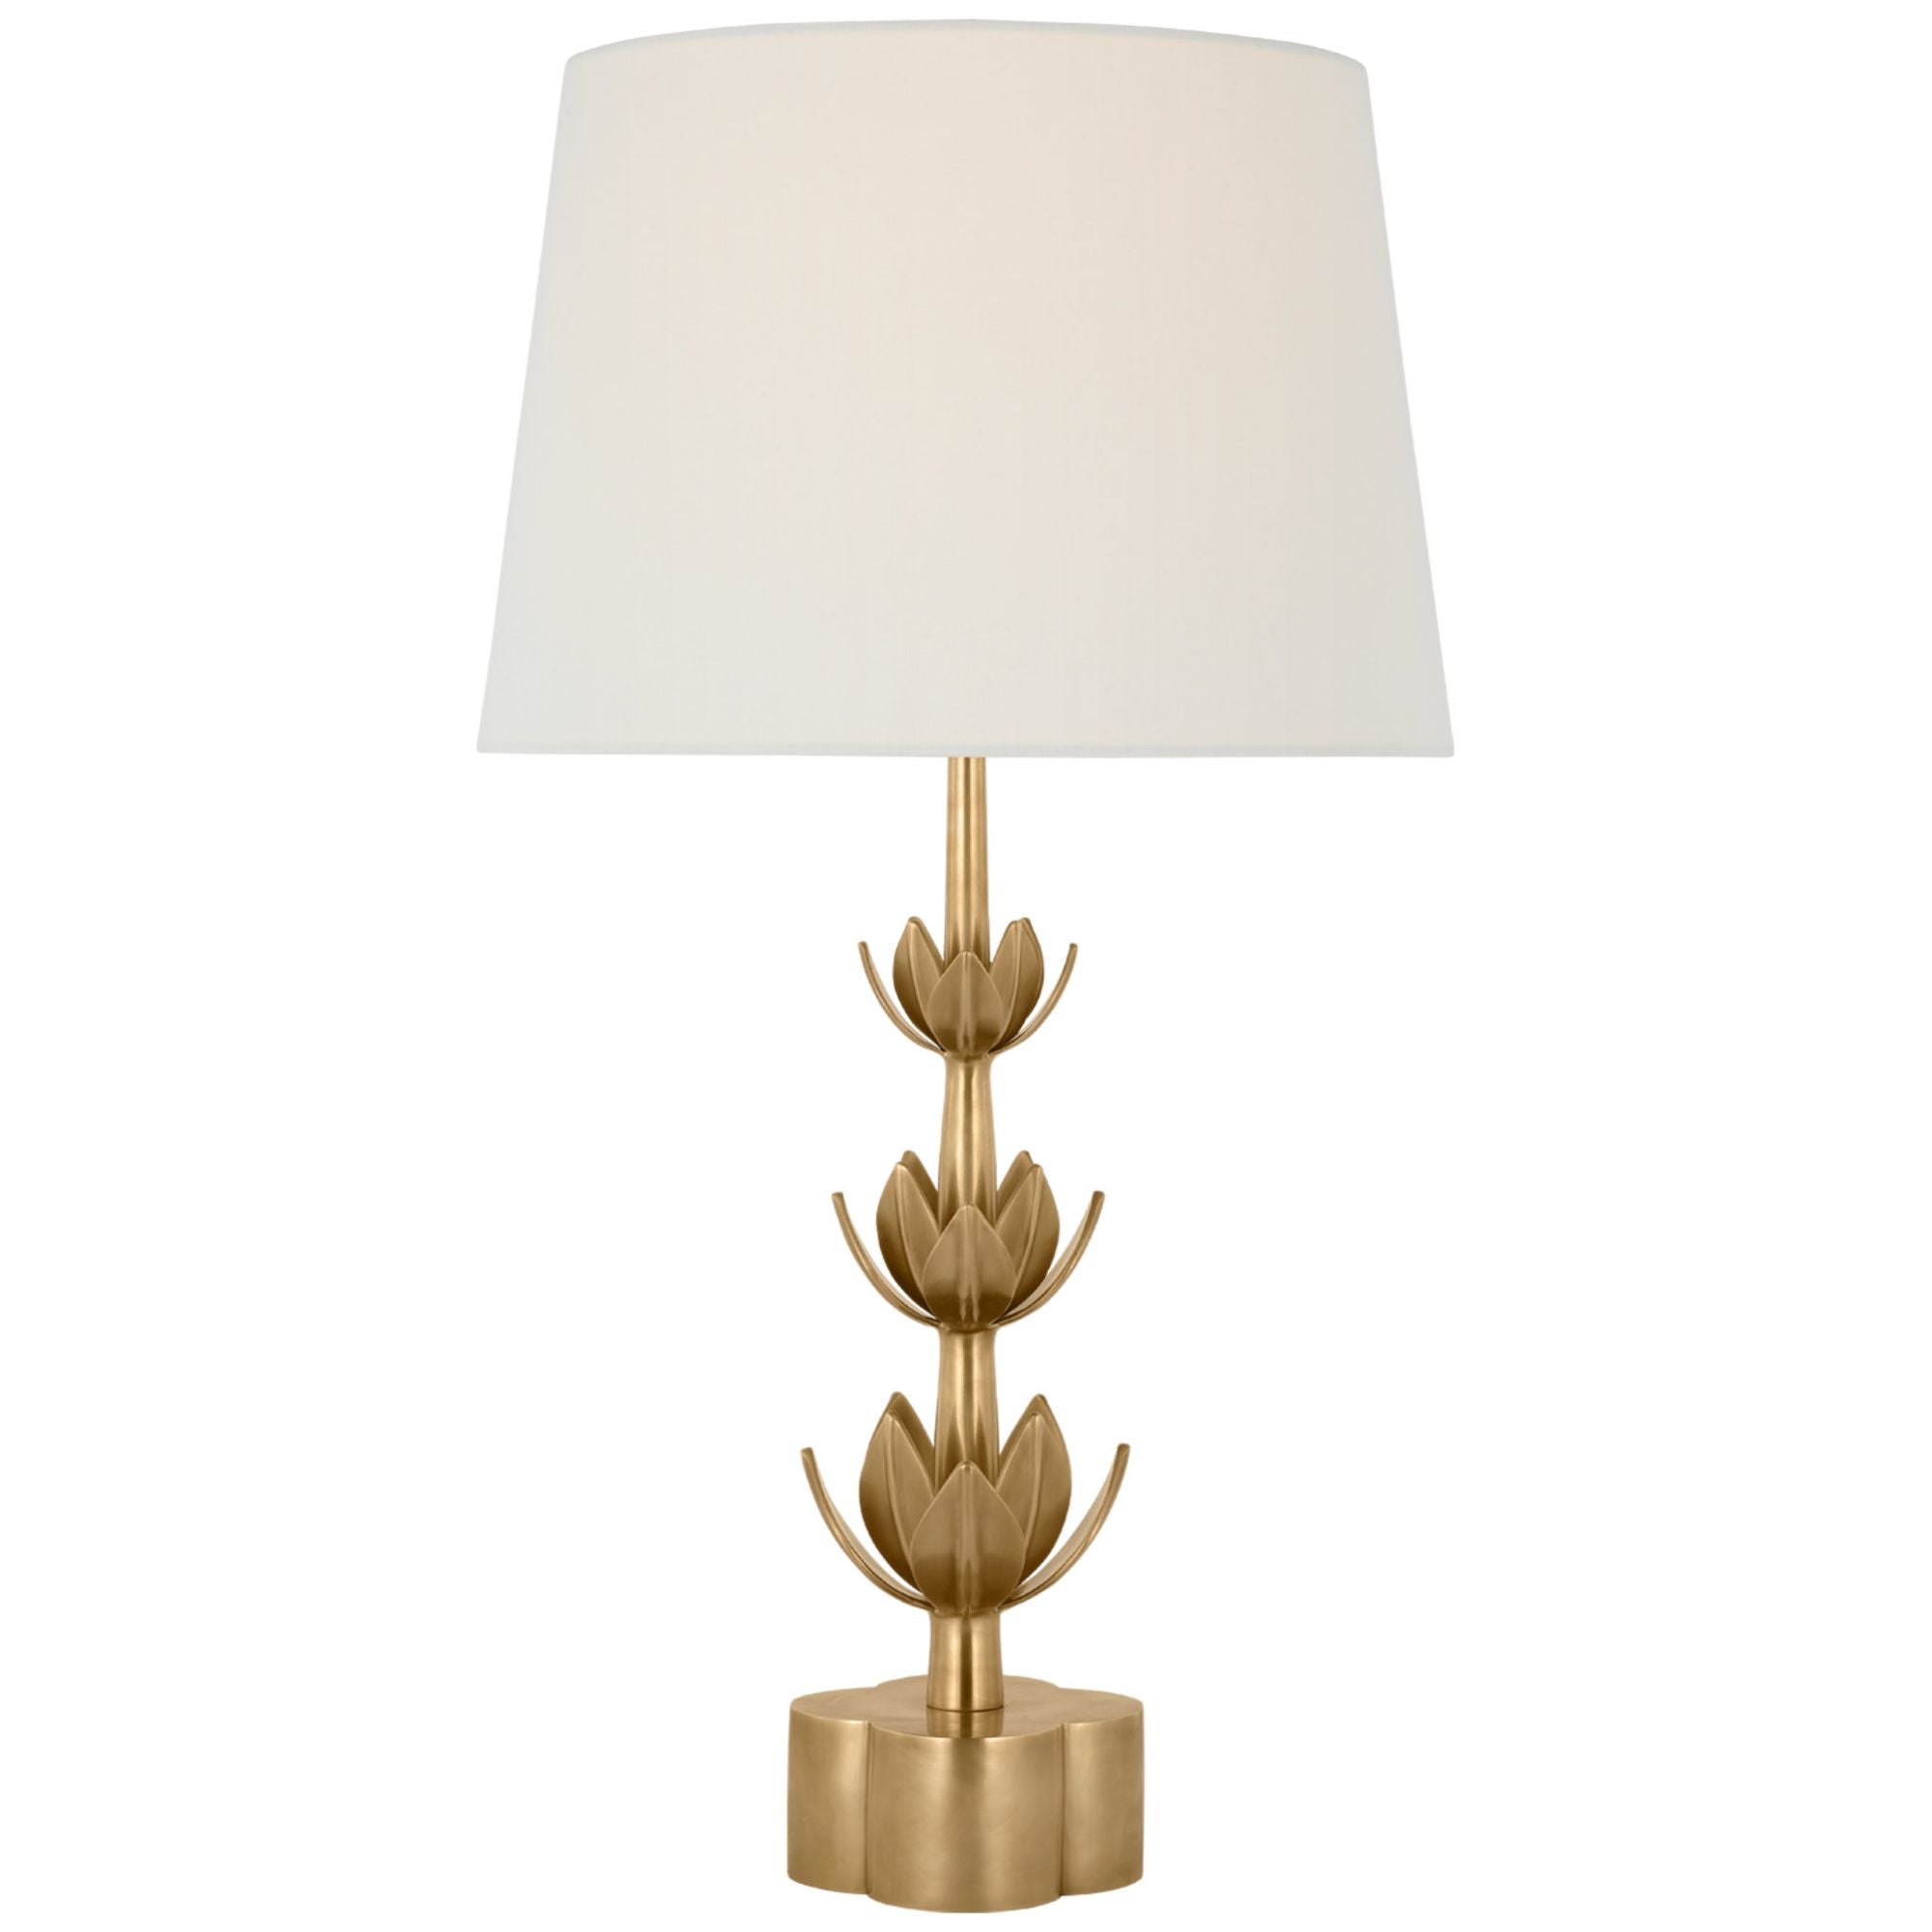 Julie Neill Alberto Large Triple Table Lamp in Antique-Burnished Brass with Linen Shade